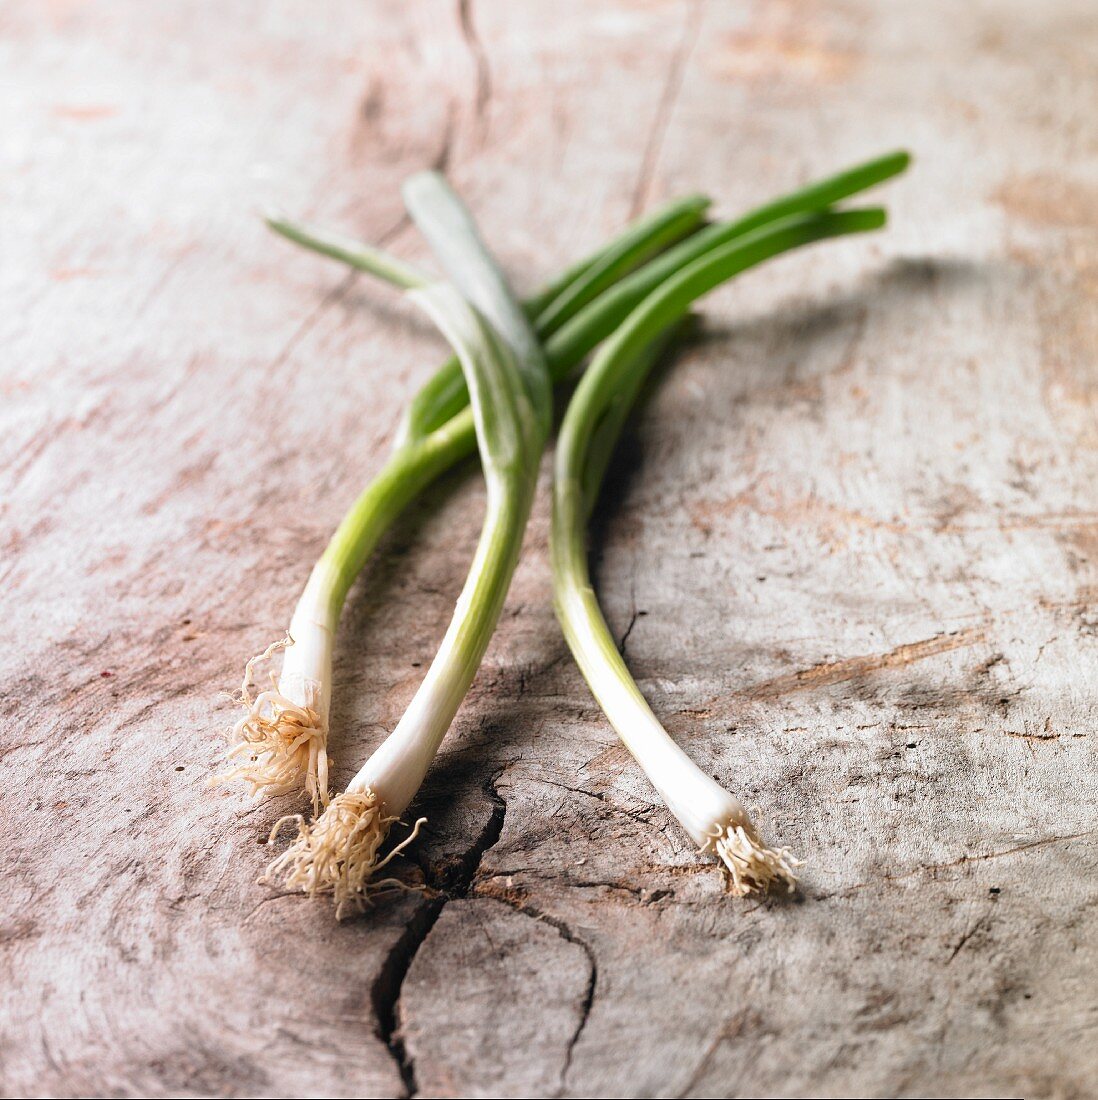 Three spring onions on a wooden surface